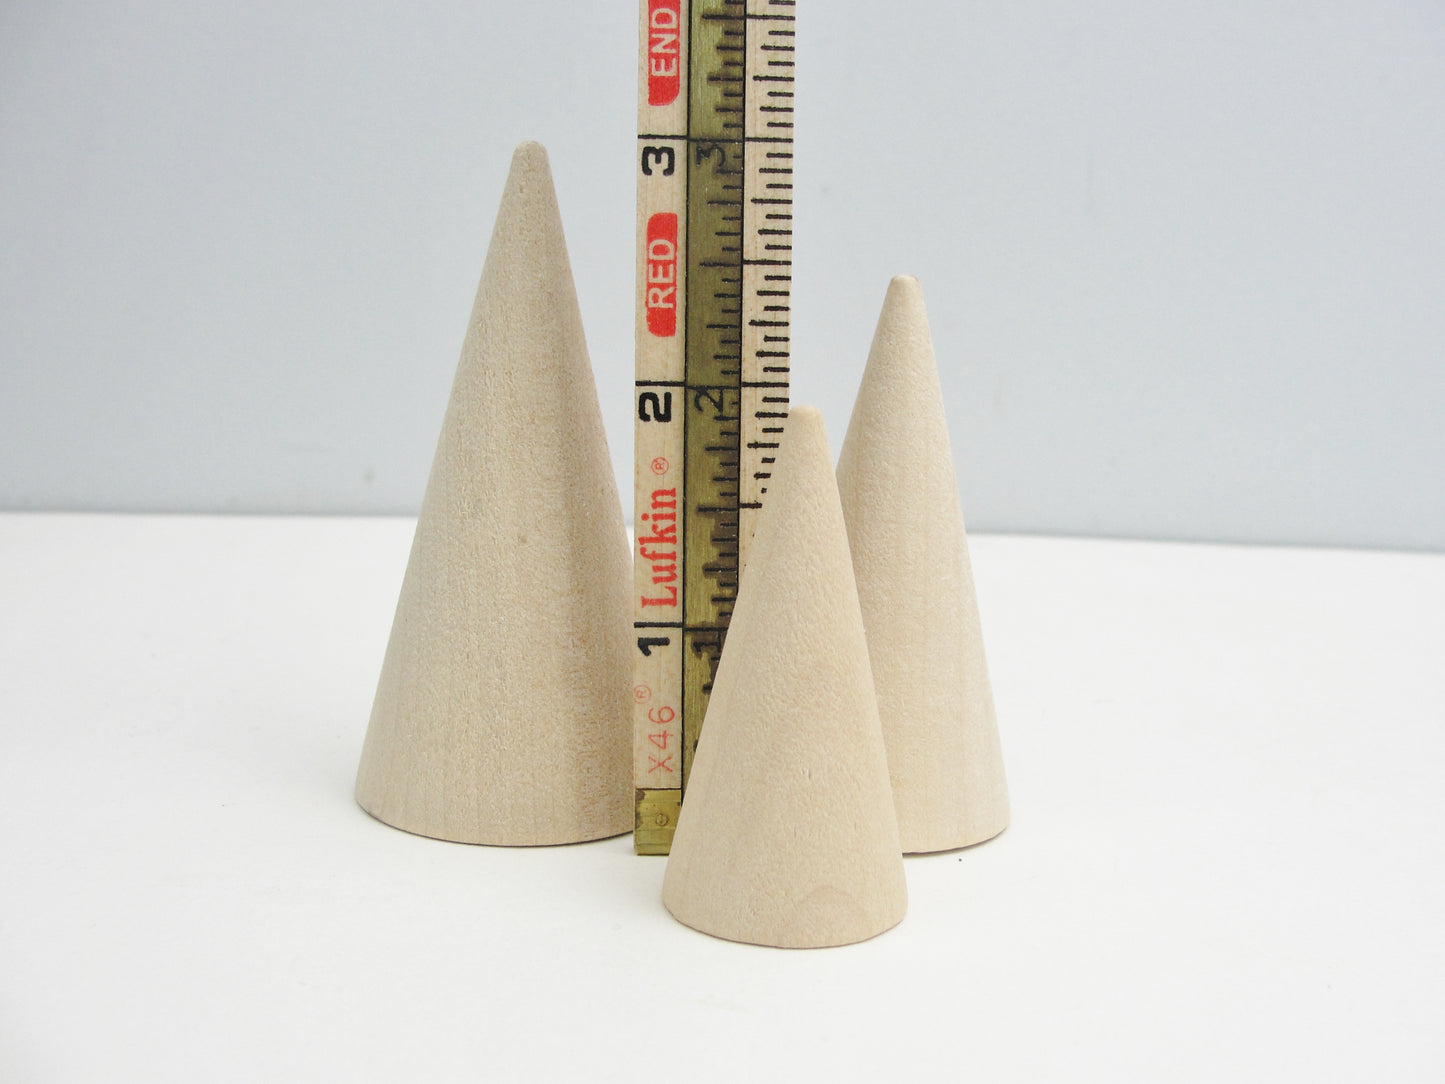 Cone set 2 each of 3 sizes 3", 2.5", 2"